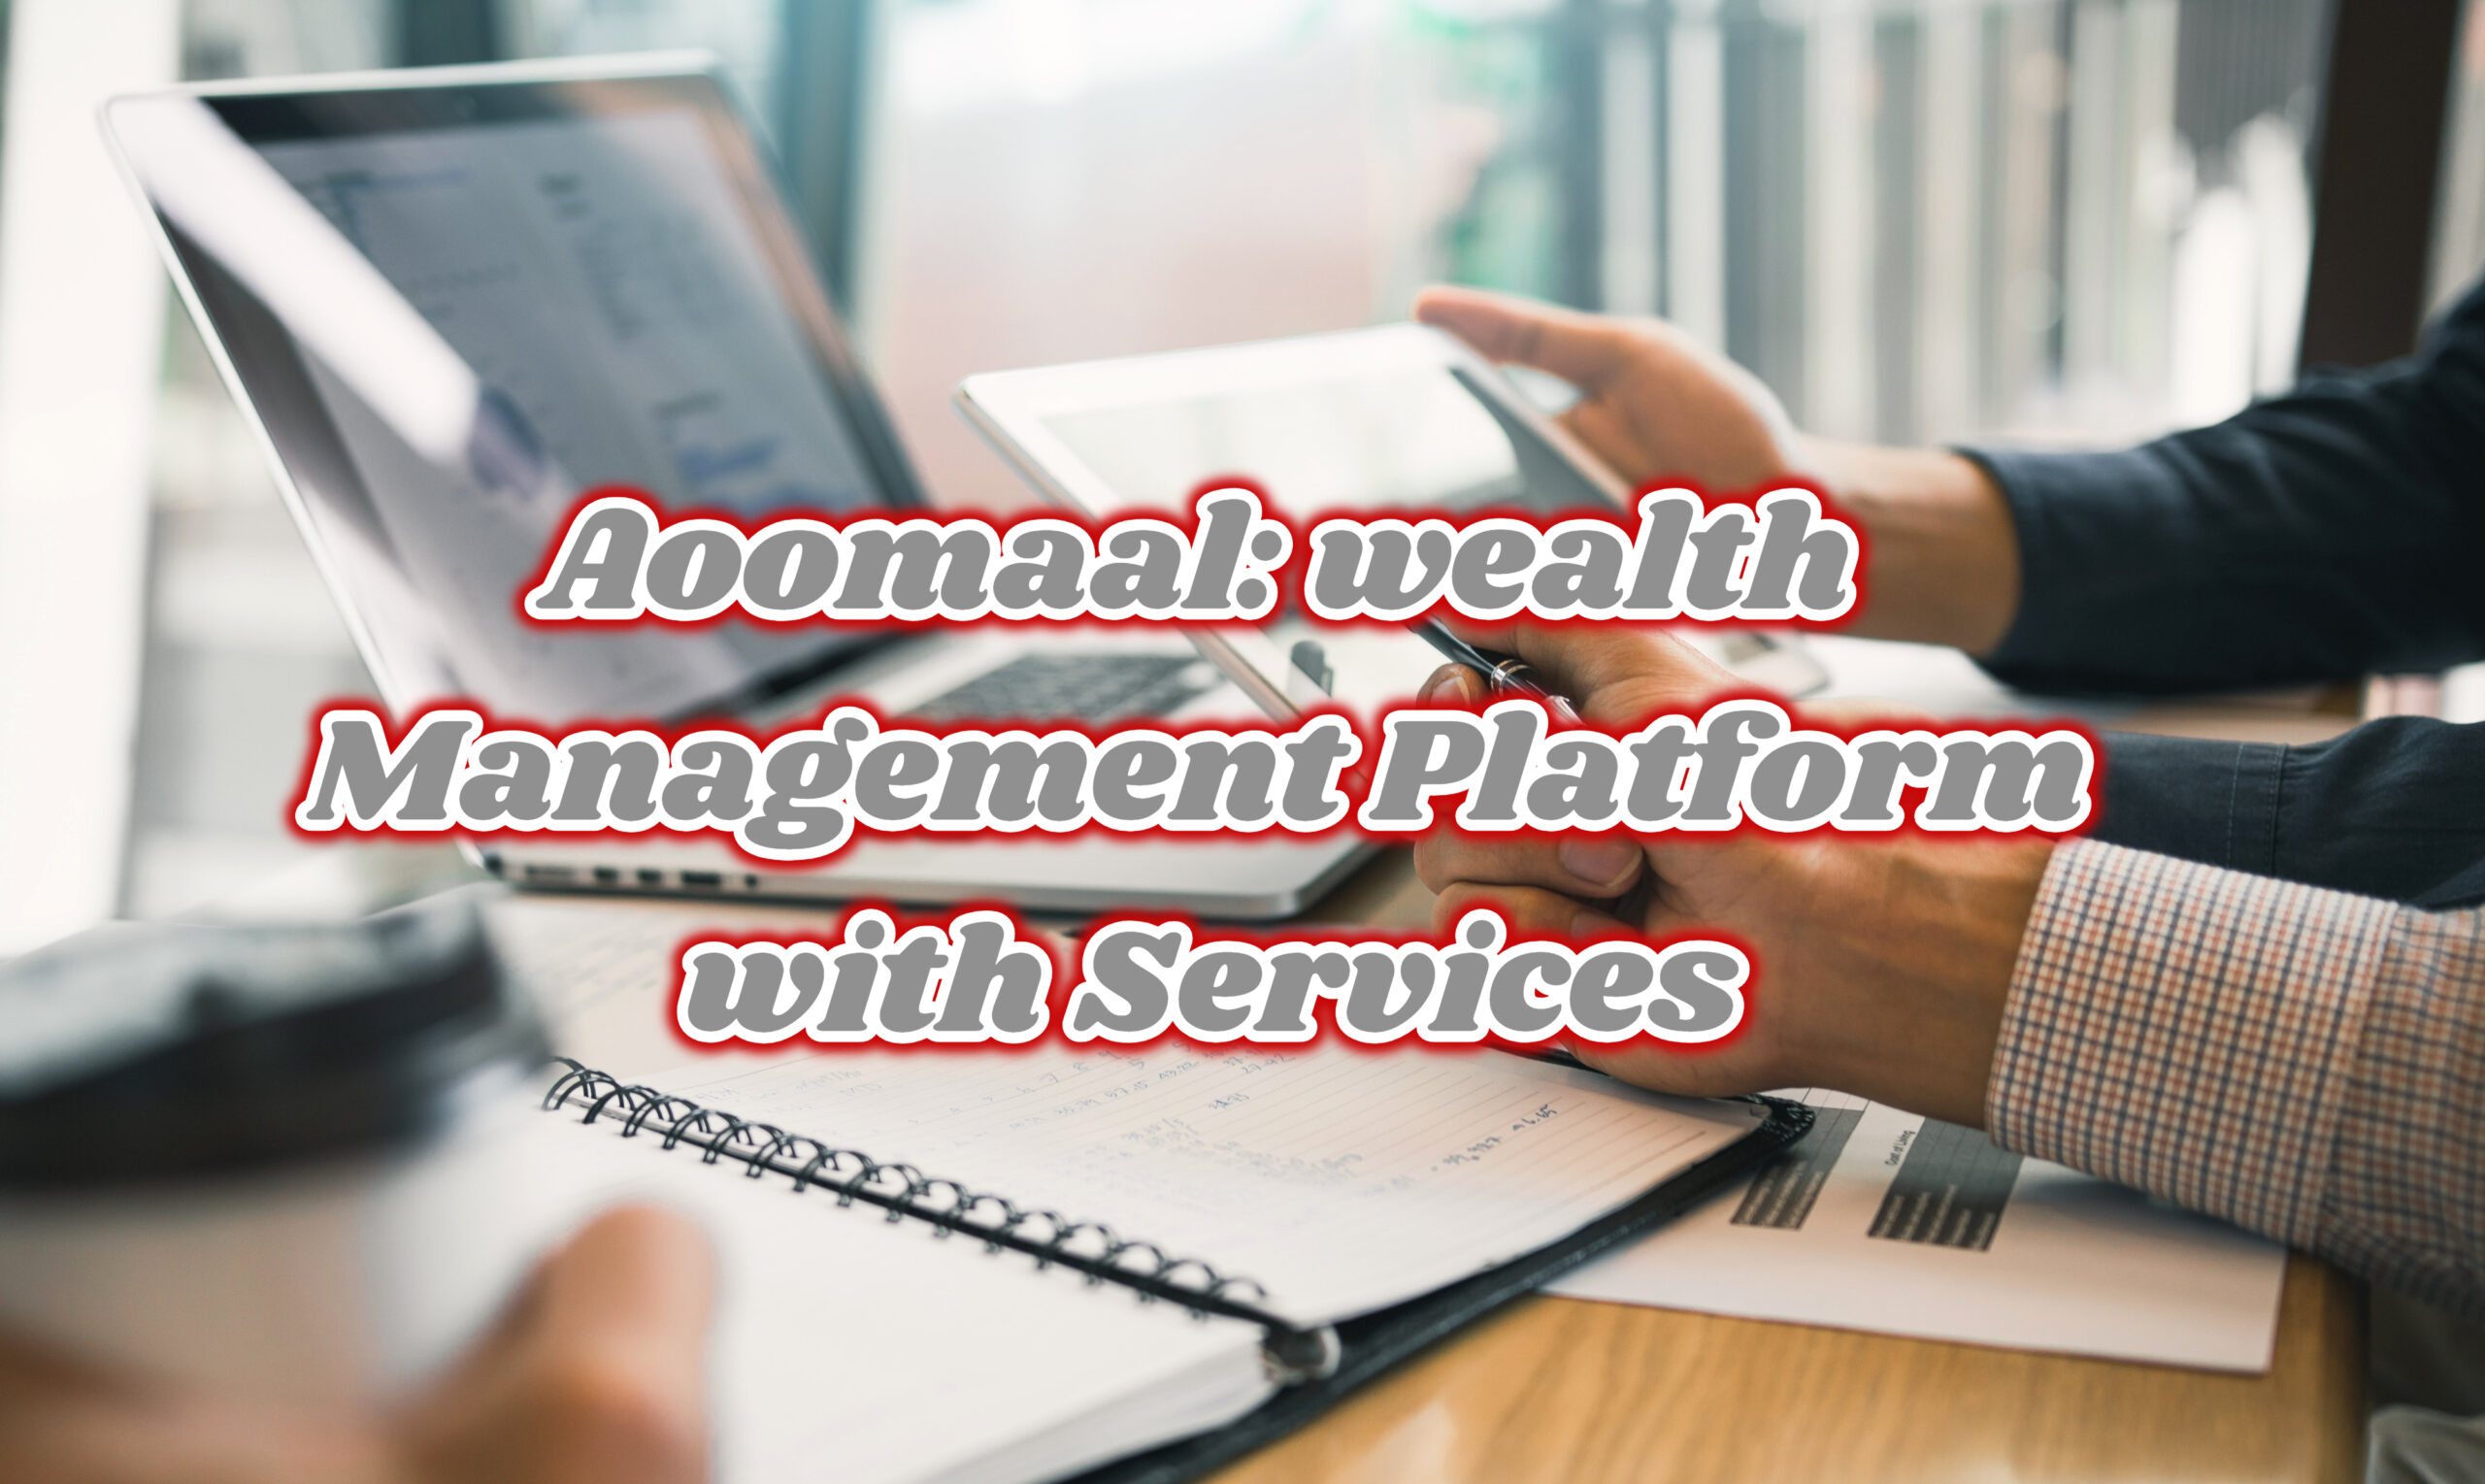 Aoomaal: wealth Management Platform with Services